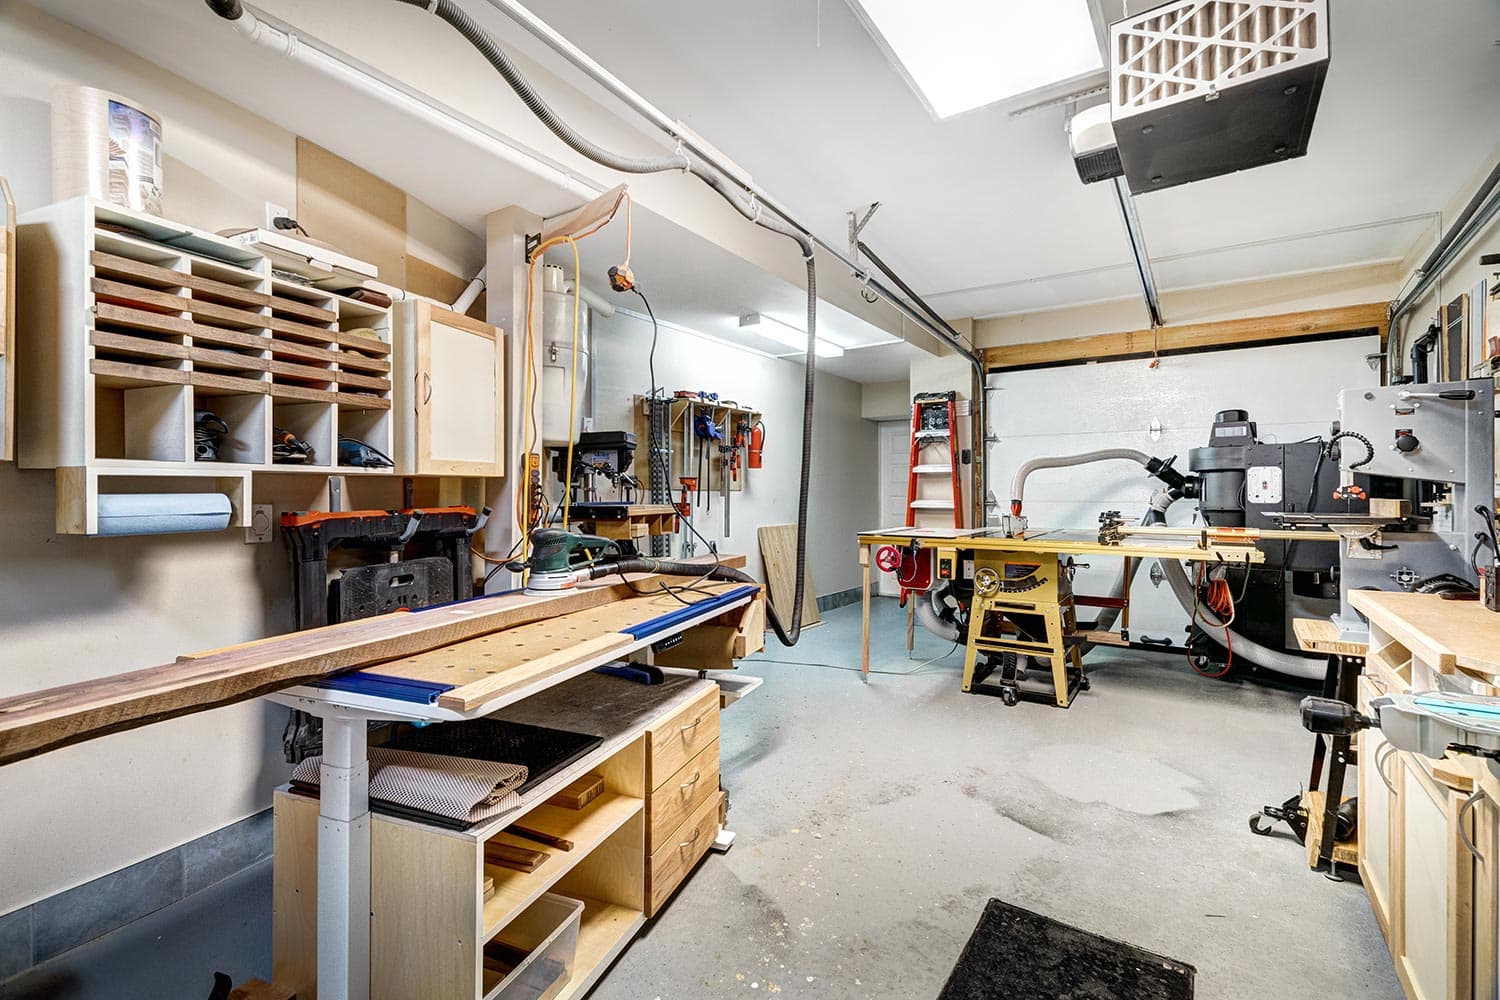 Garage workshop for cabinet making and wood working with tools and equipment